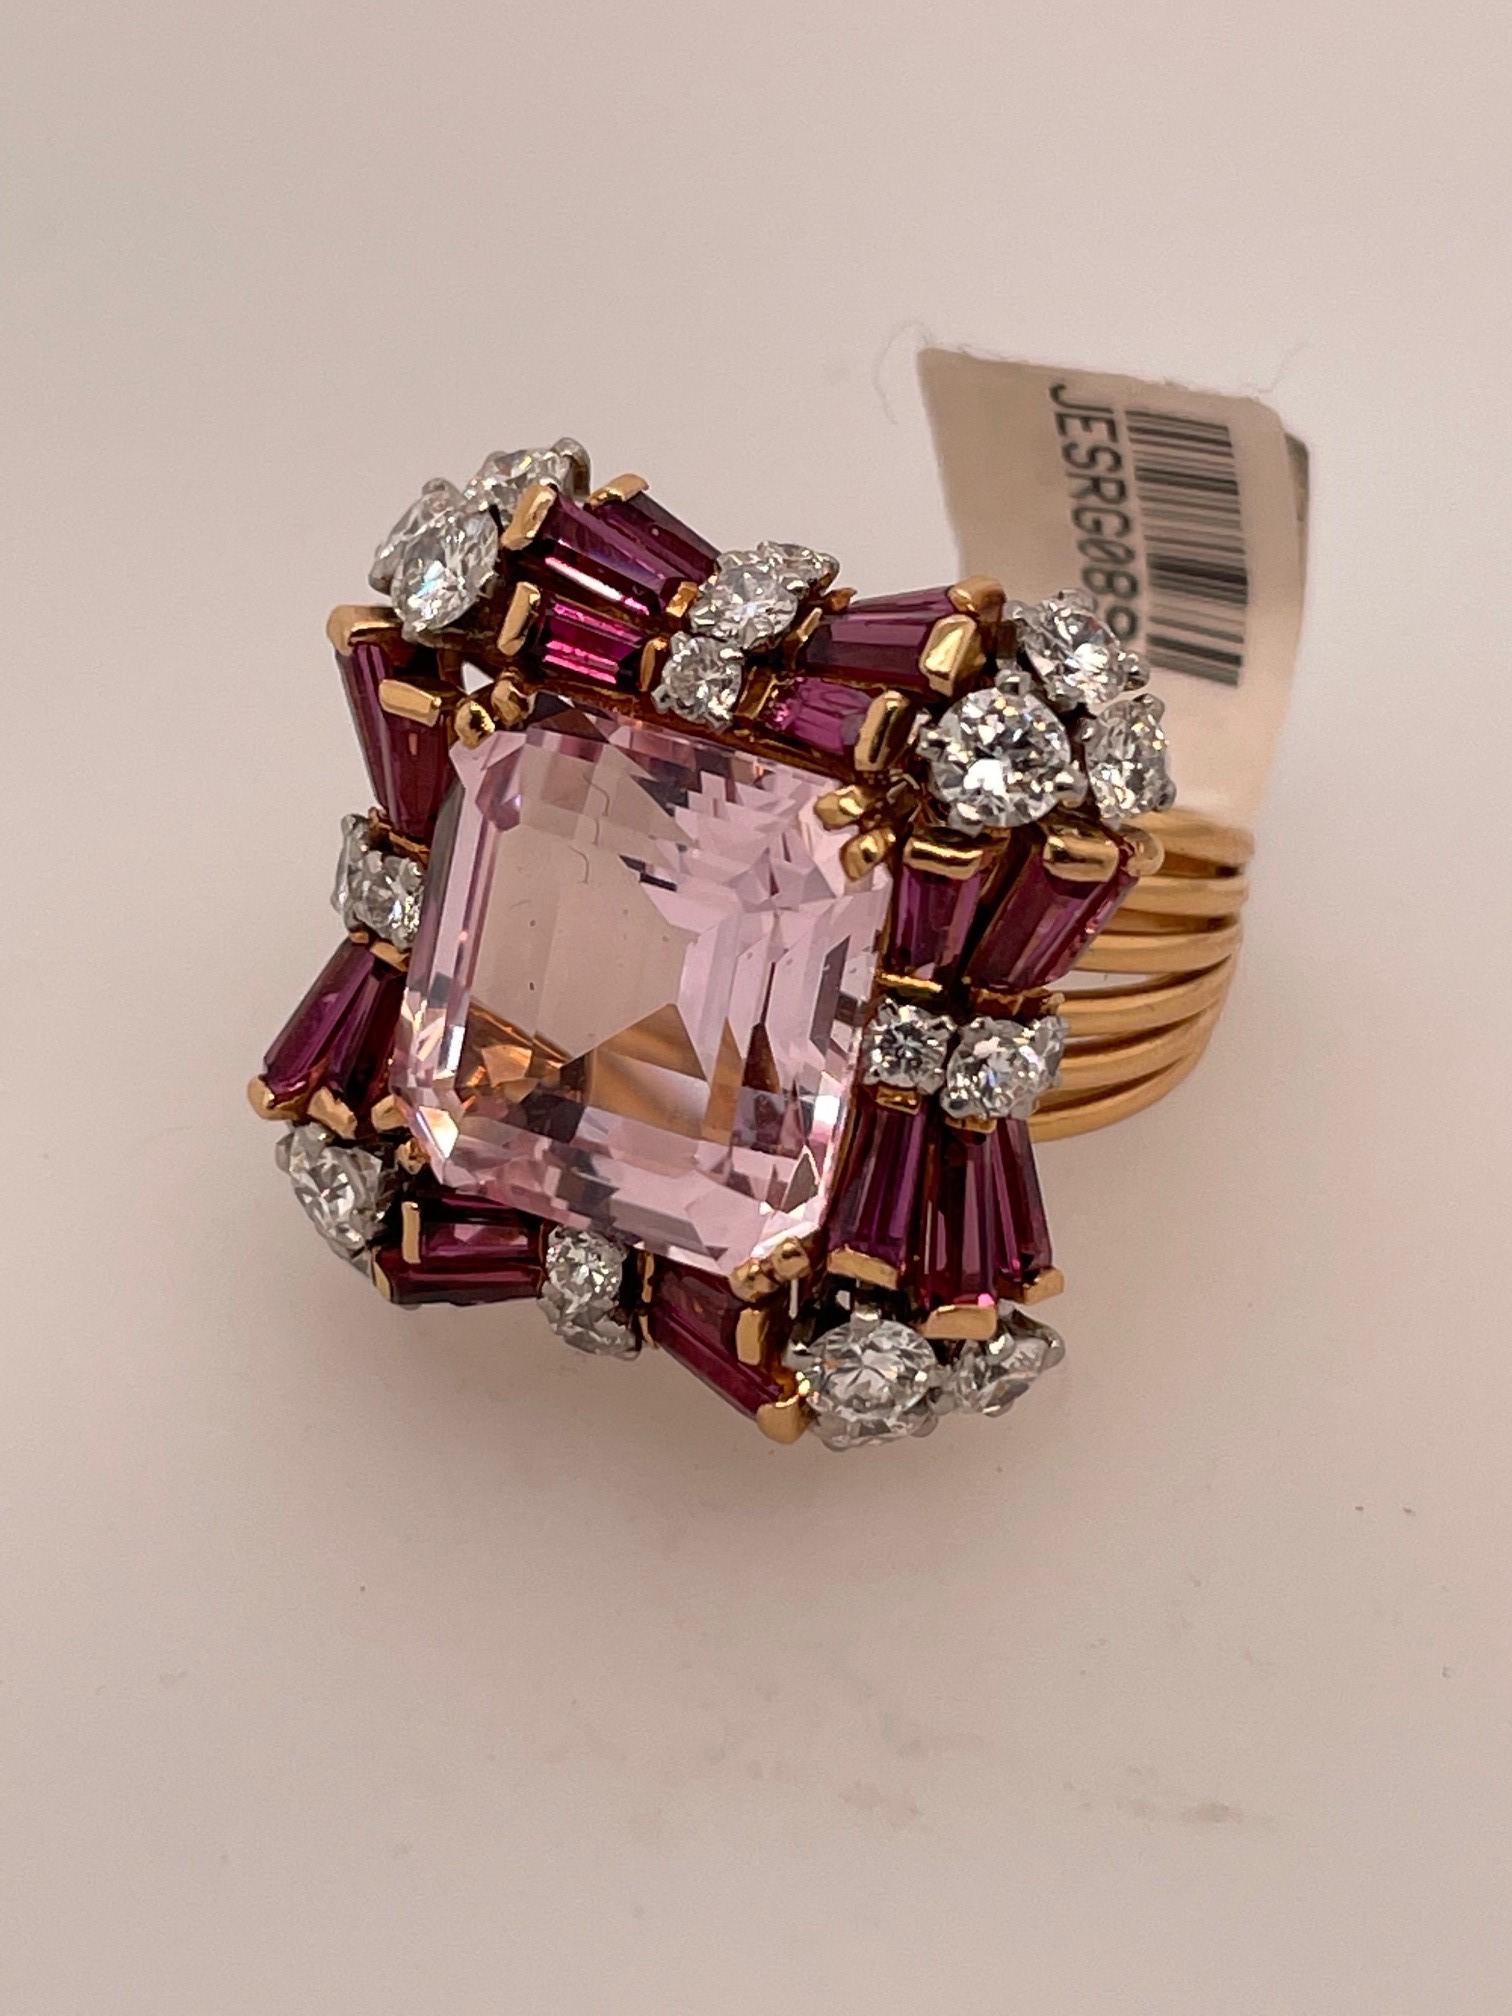 Vintage 18k rose gold Morganite, Pink Tourmaline and Diamond ring. The ring is cast and of handmade manufacture consistng of 6 row wire shank and top set with a center Morganite beryl weighing 10.00 ctw, surrounded by a triple row of tapered